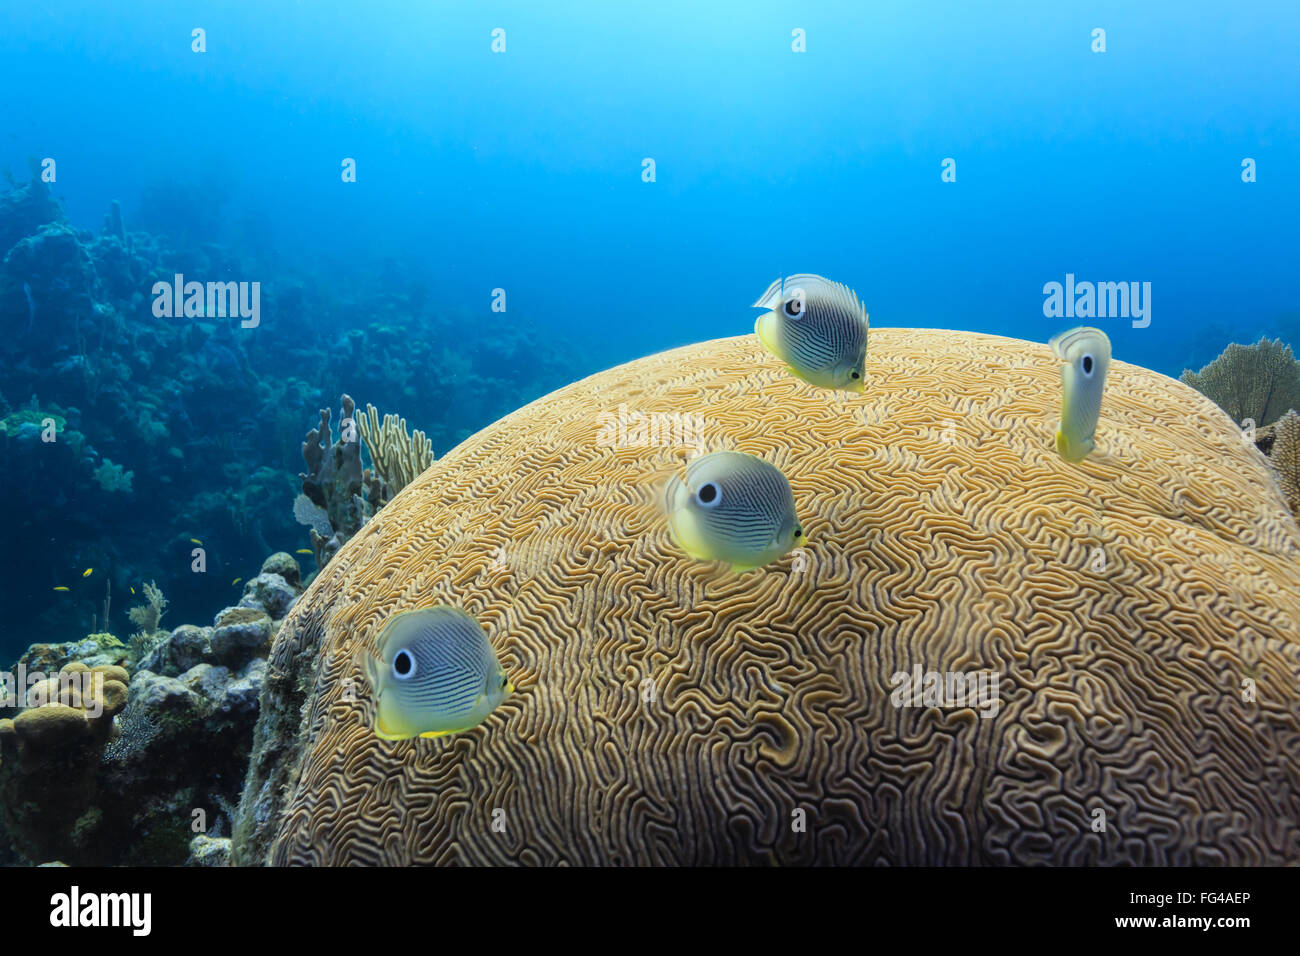 Foureye Butterflyfish chaetodon capistratus swimming above brain coral on coral reef Stock Photo